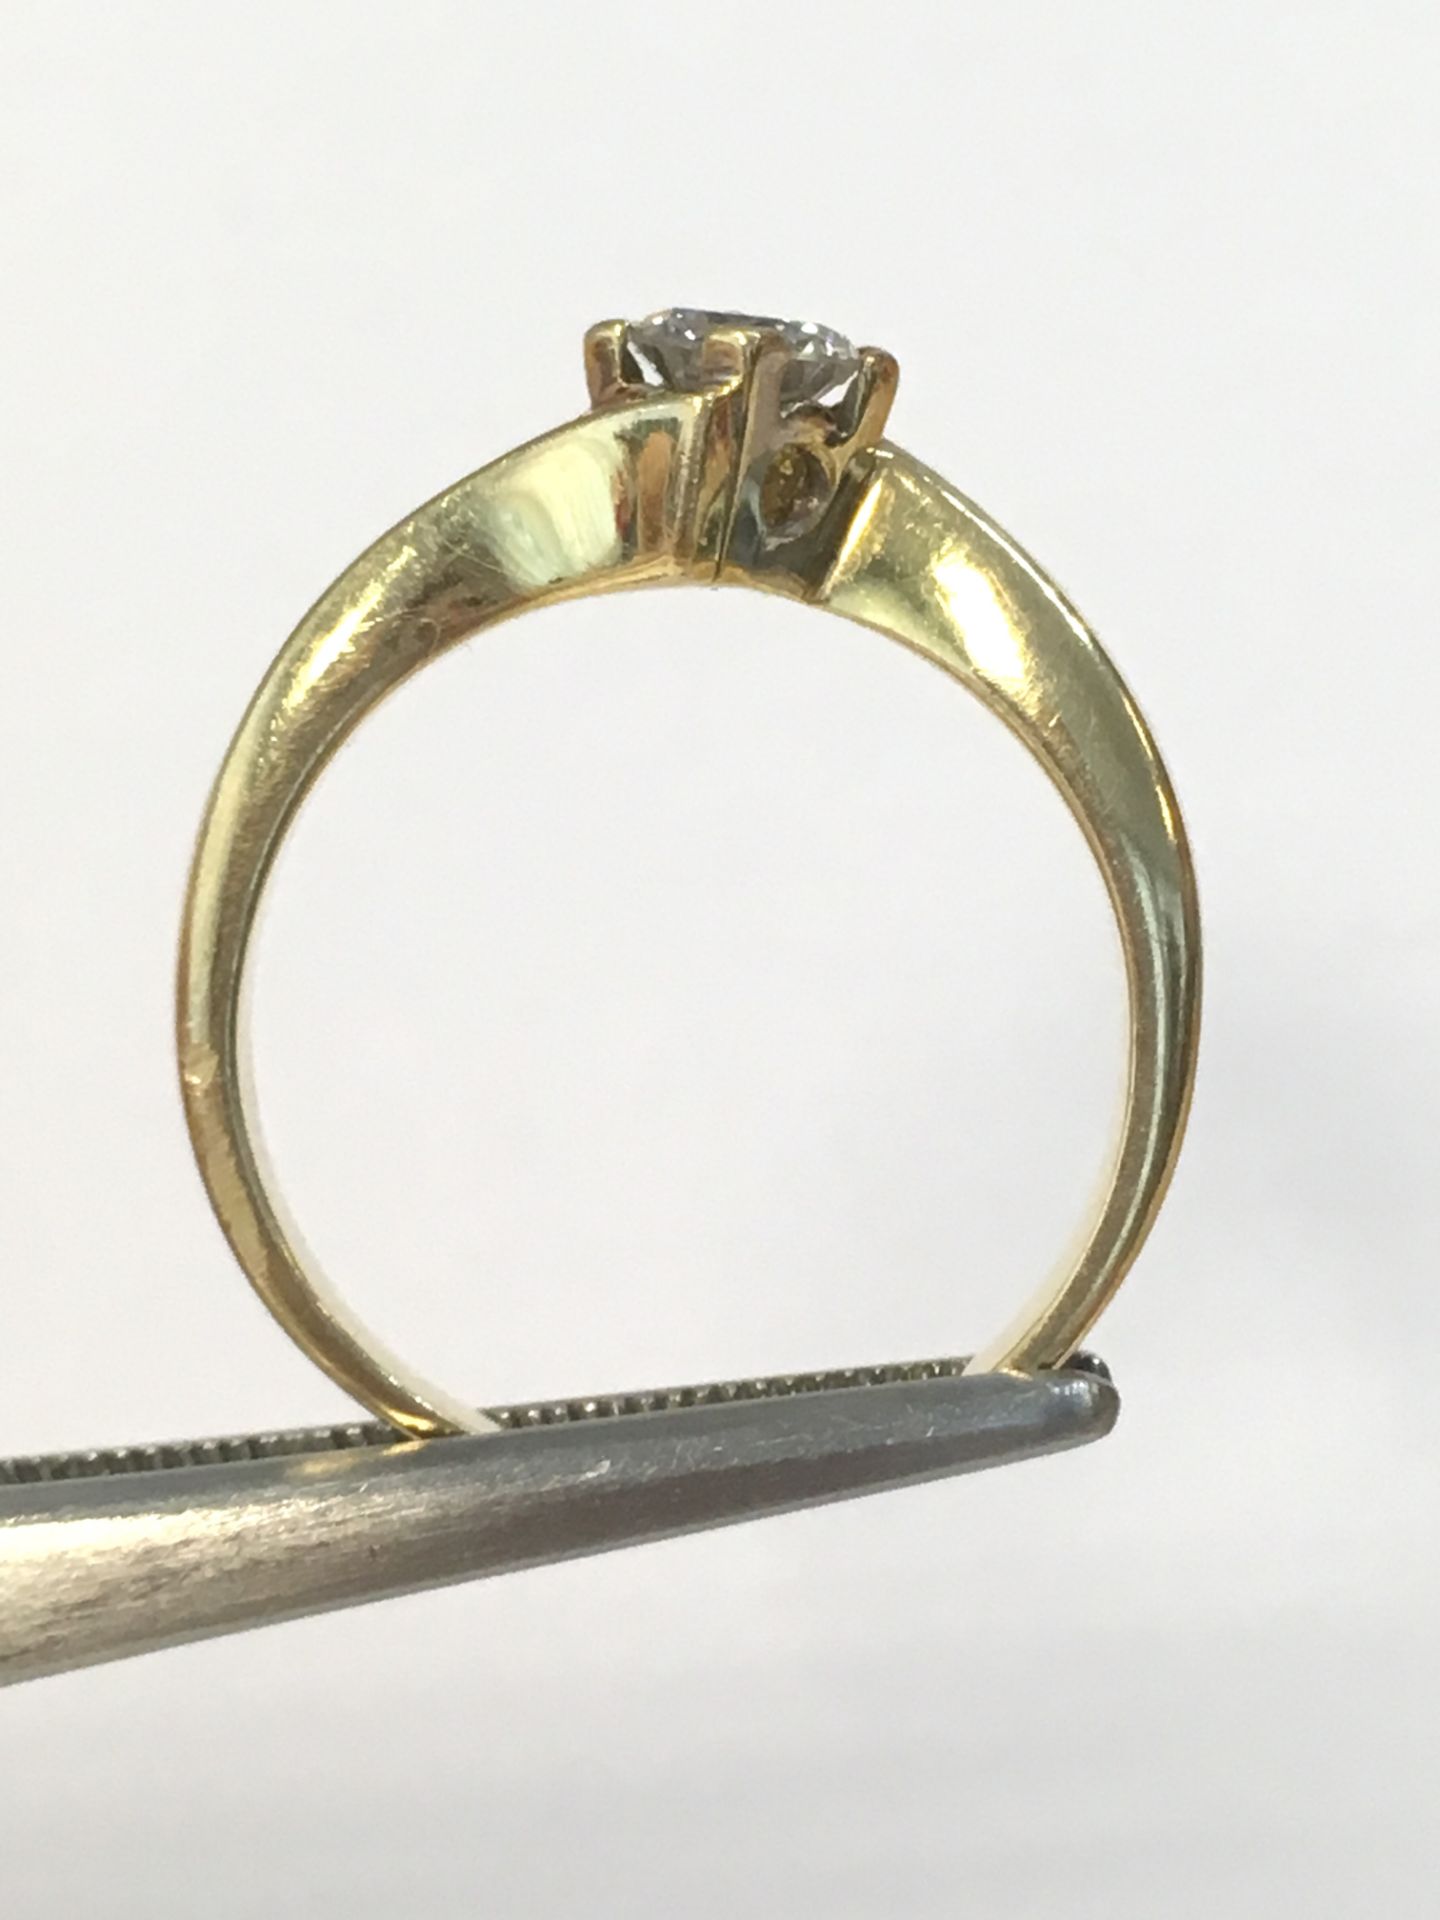 10K Yellow Gold Ring with 0.28Ct Diamond - Image 3 of 3